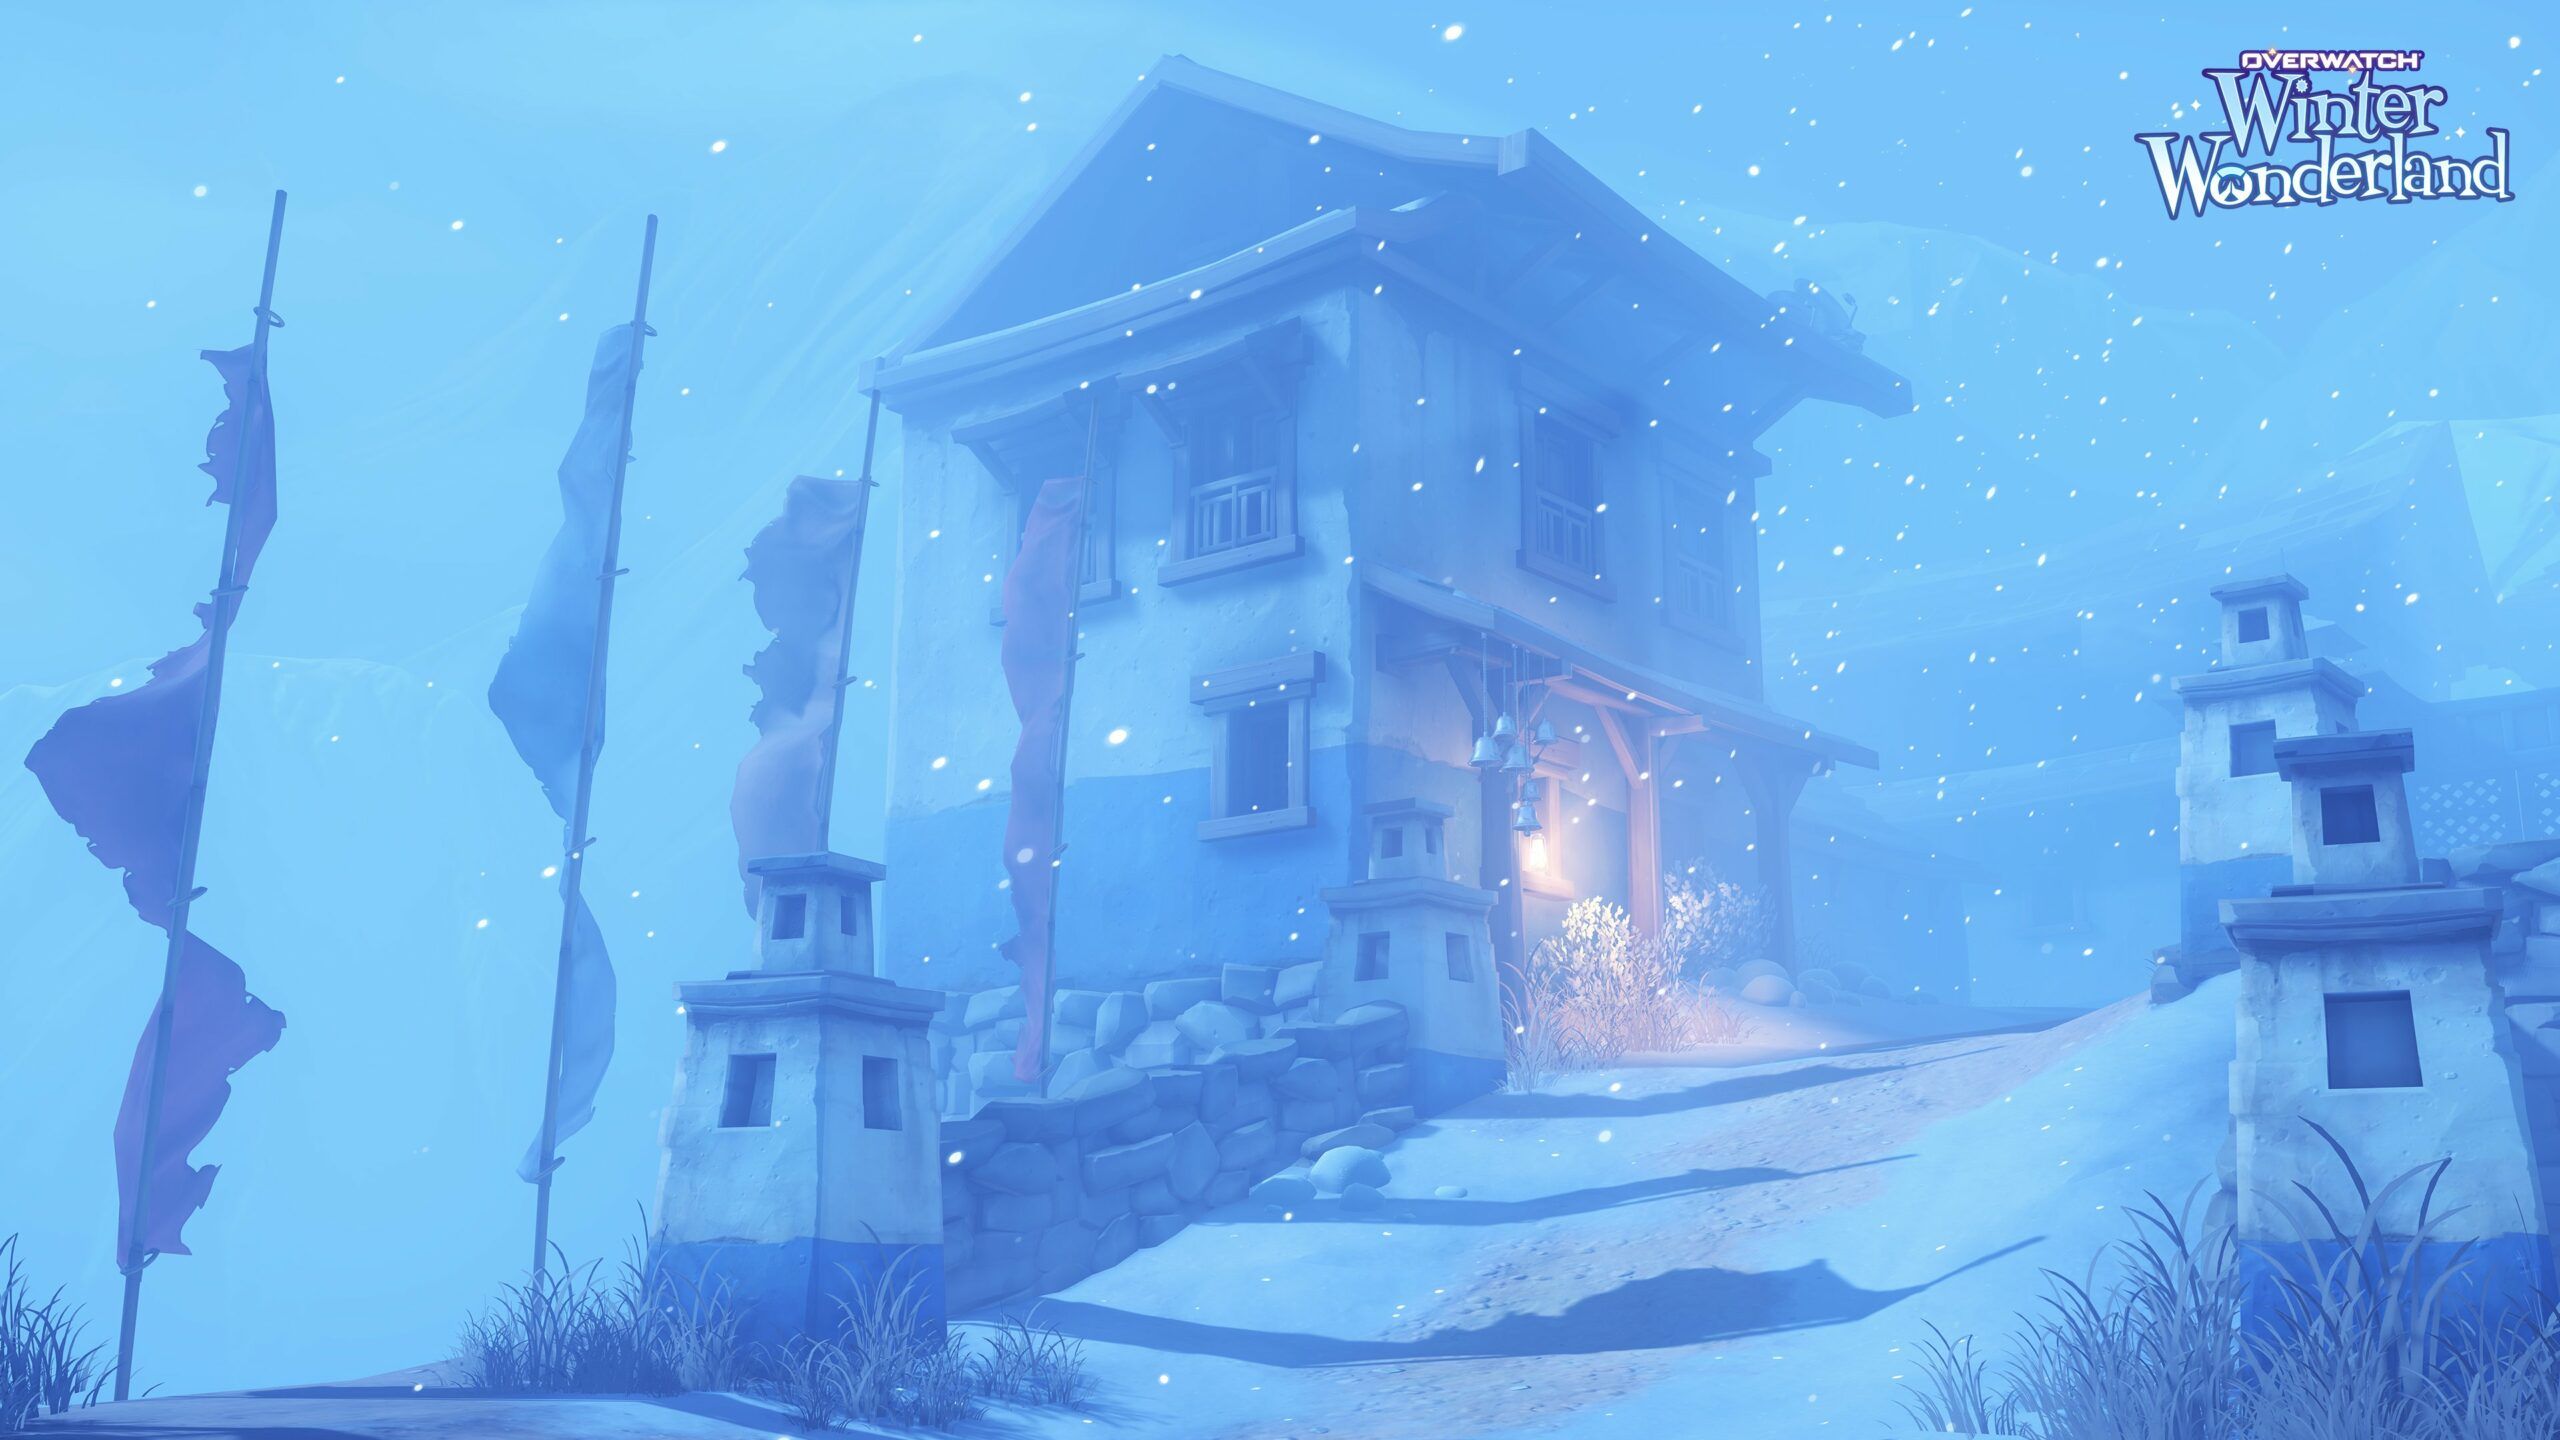 Overwatch Winter Wonderland 2021 End Time in January 2022